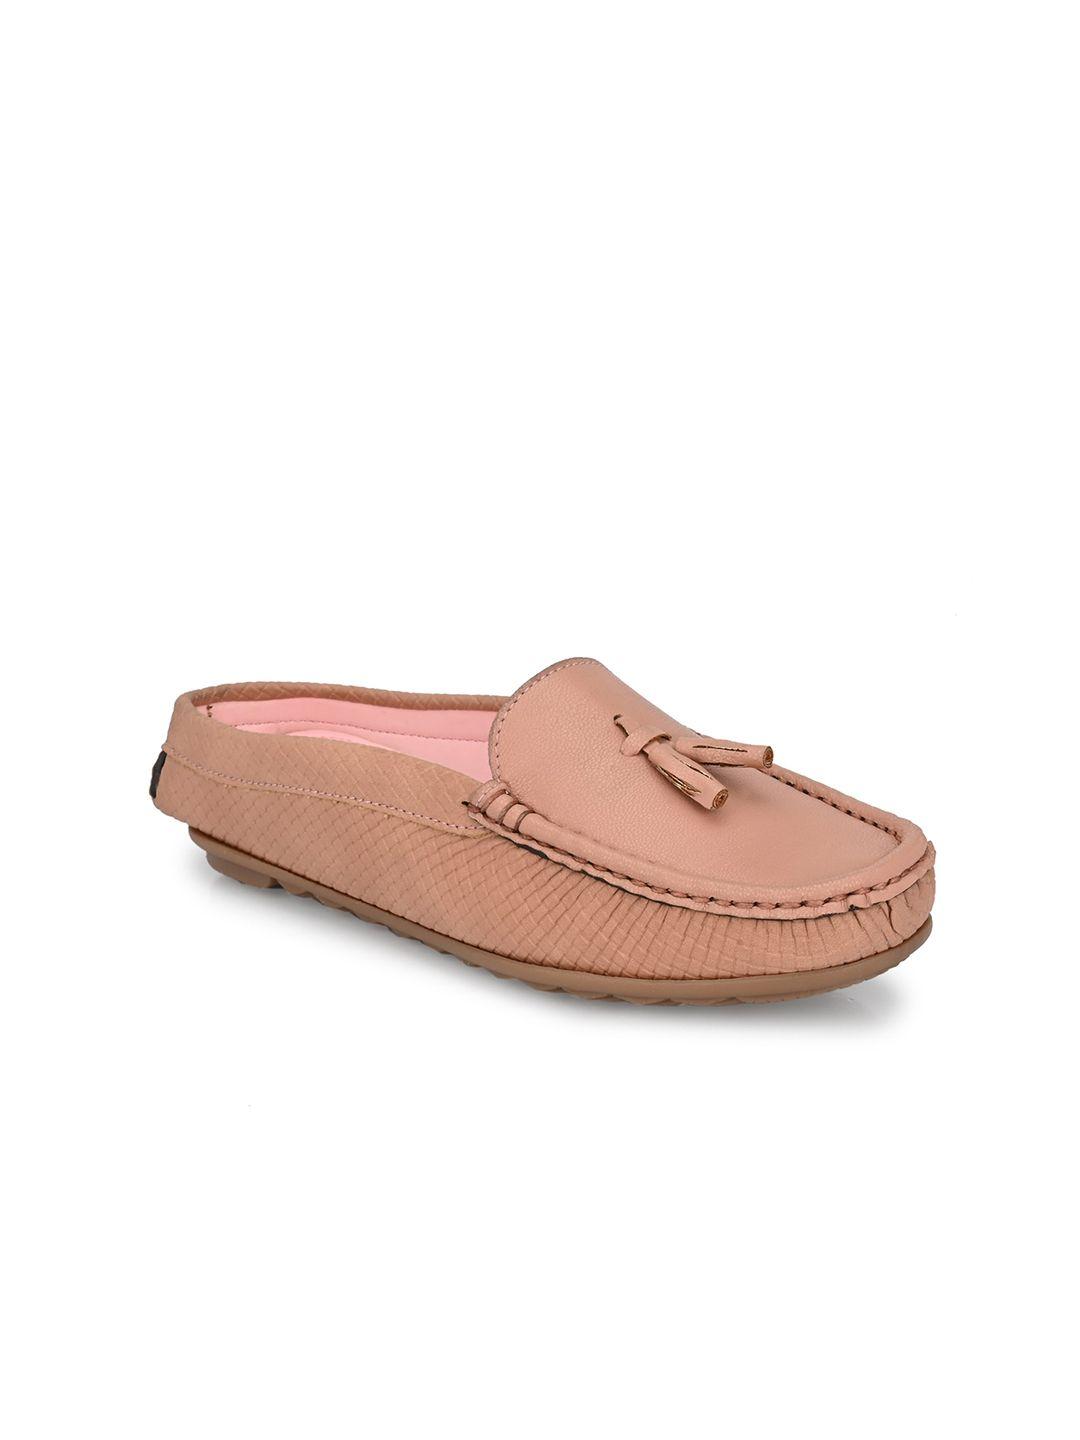 el-paso-women-textured-light-weight-slip-on-tassel-loafers-casual-shoes